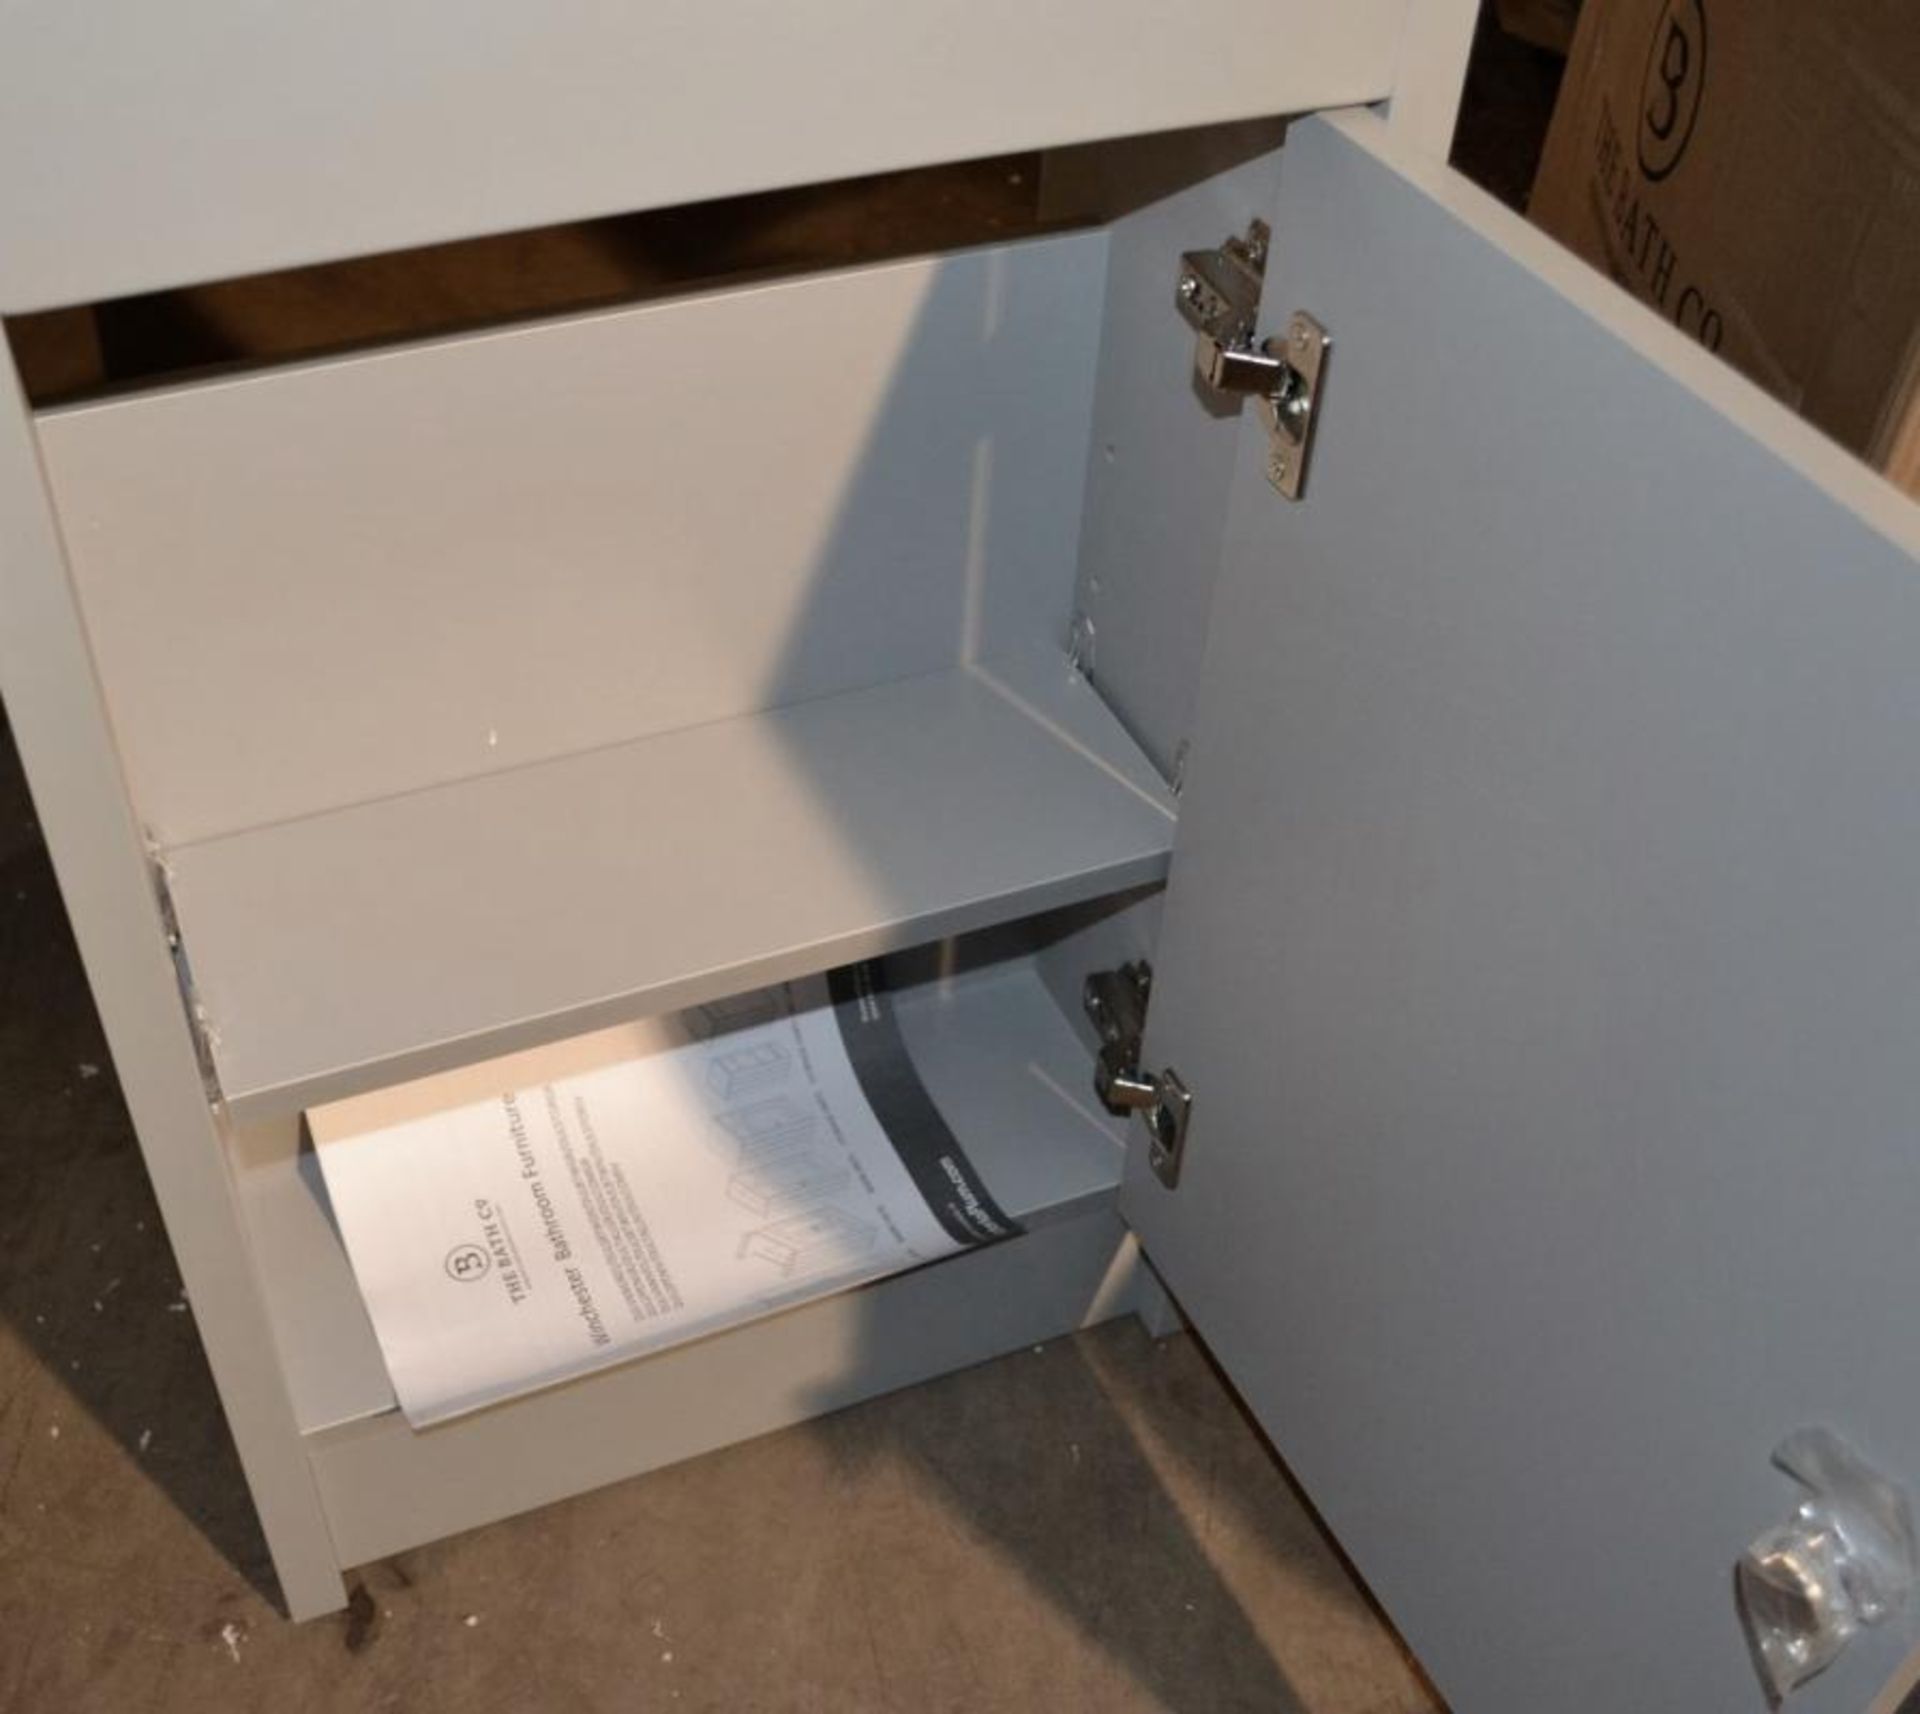 1 x Winchester Grey Cloakroom Vanity Unit In Stone Grey (DULCOMGR) - New / Unused Stock - Dimensions - Image 3 of 4